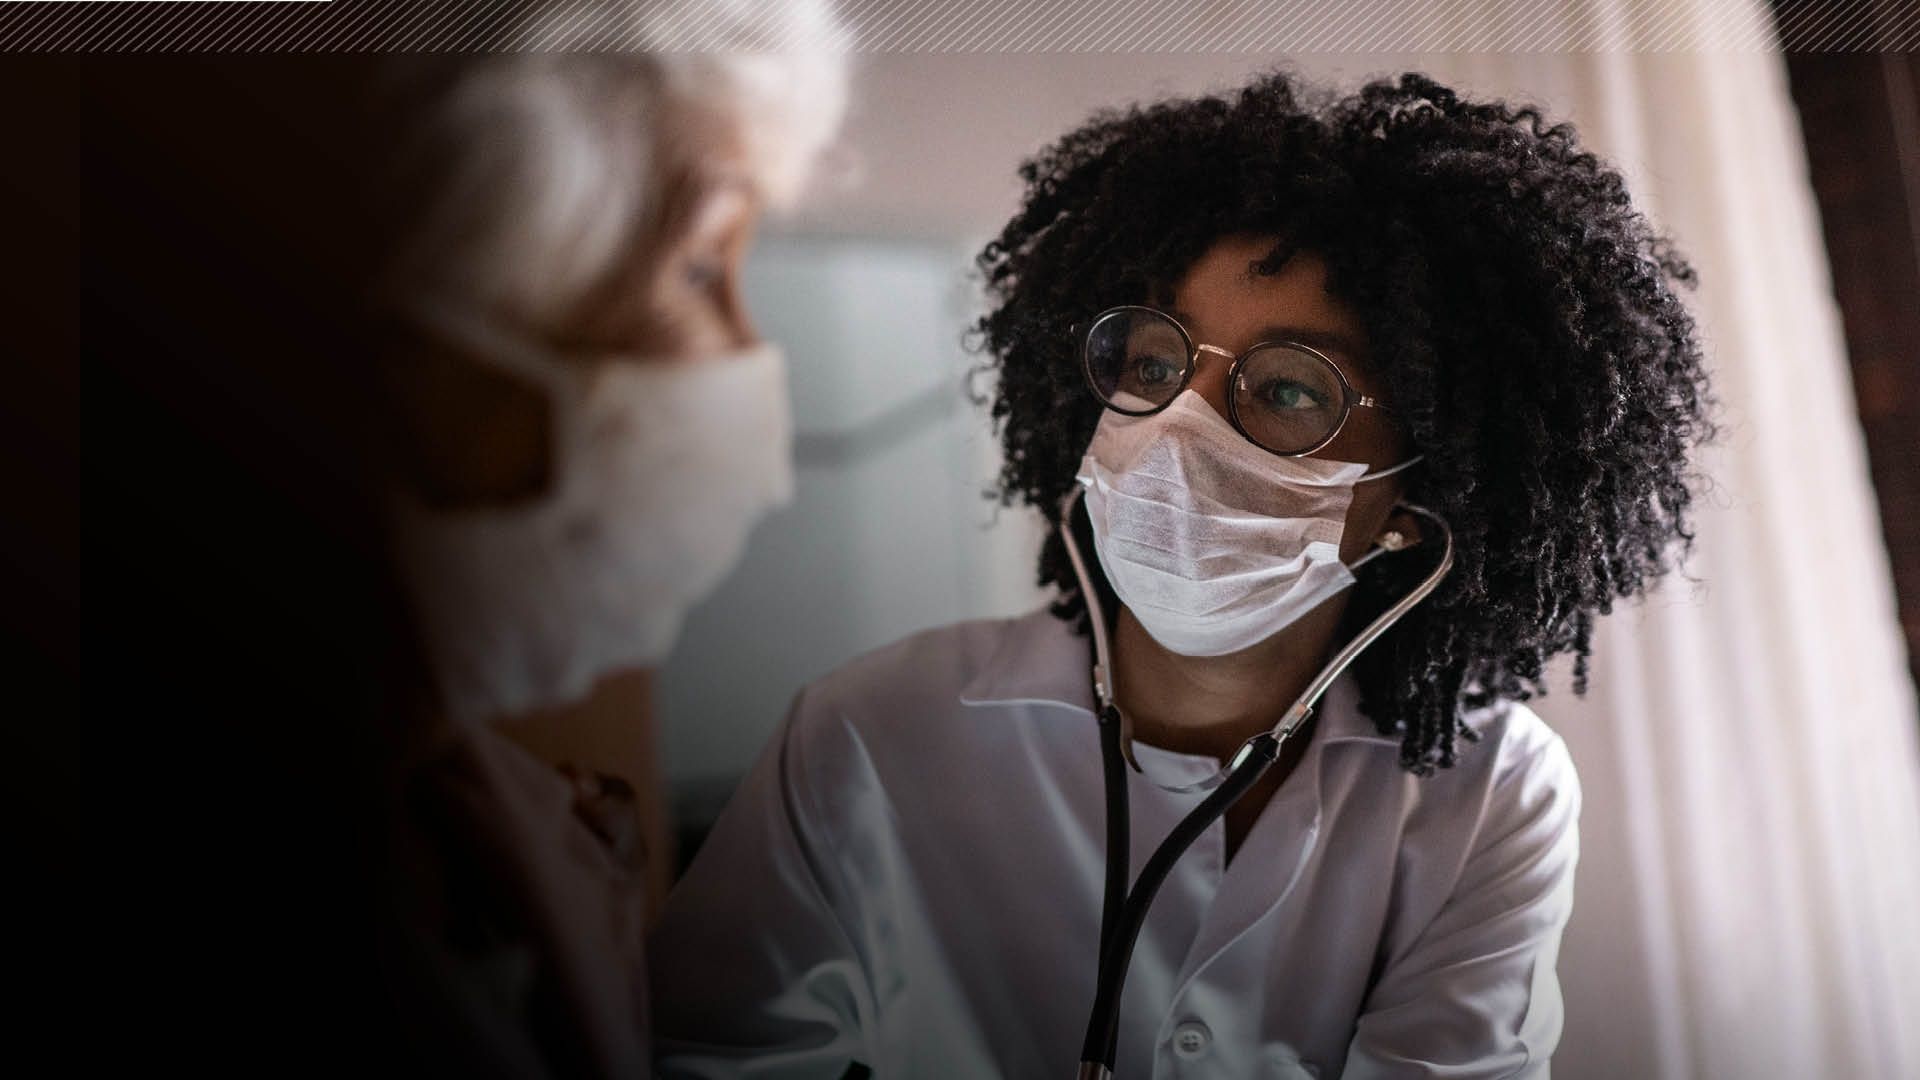 A nurse with a mask and glasses on attends to a patient